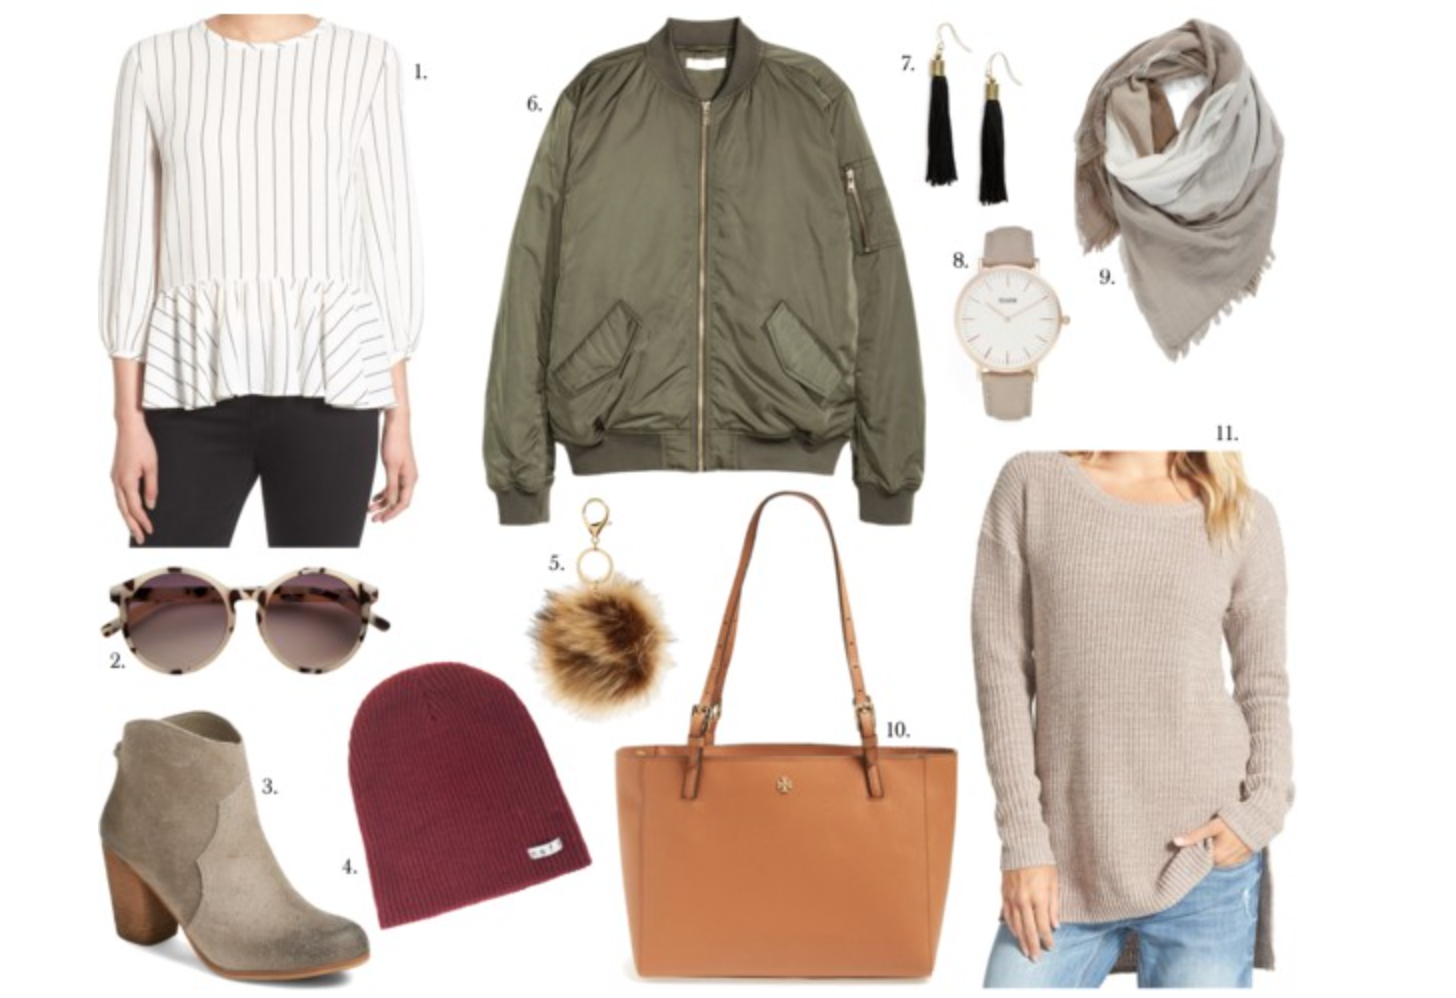 Must-have Fall clothing items - My Styled Life